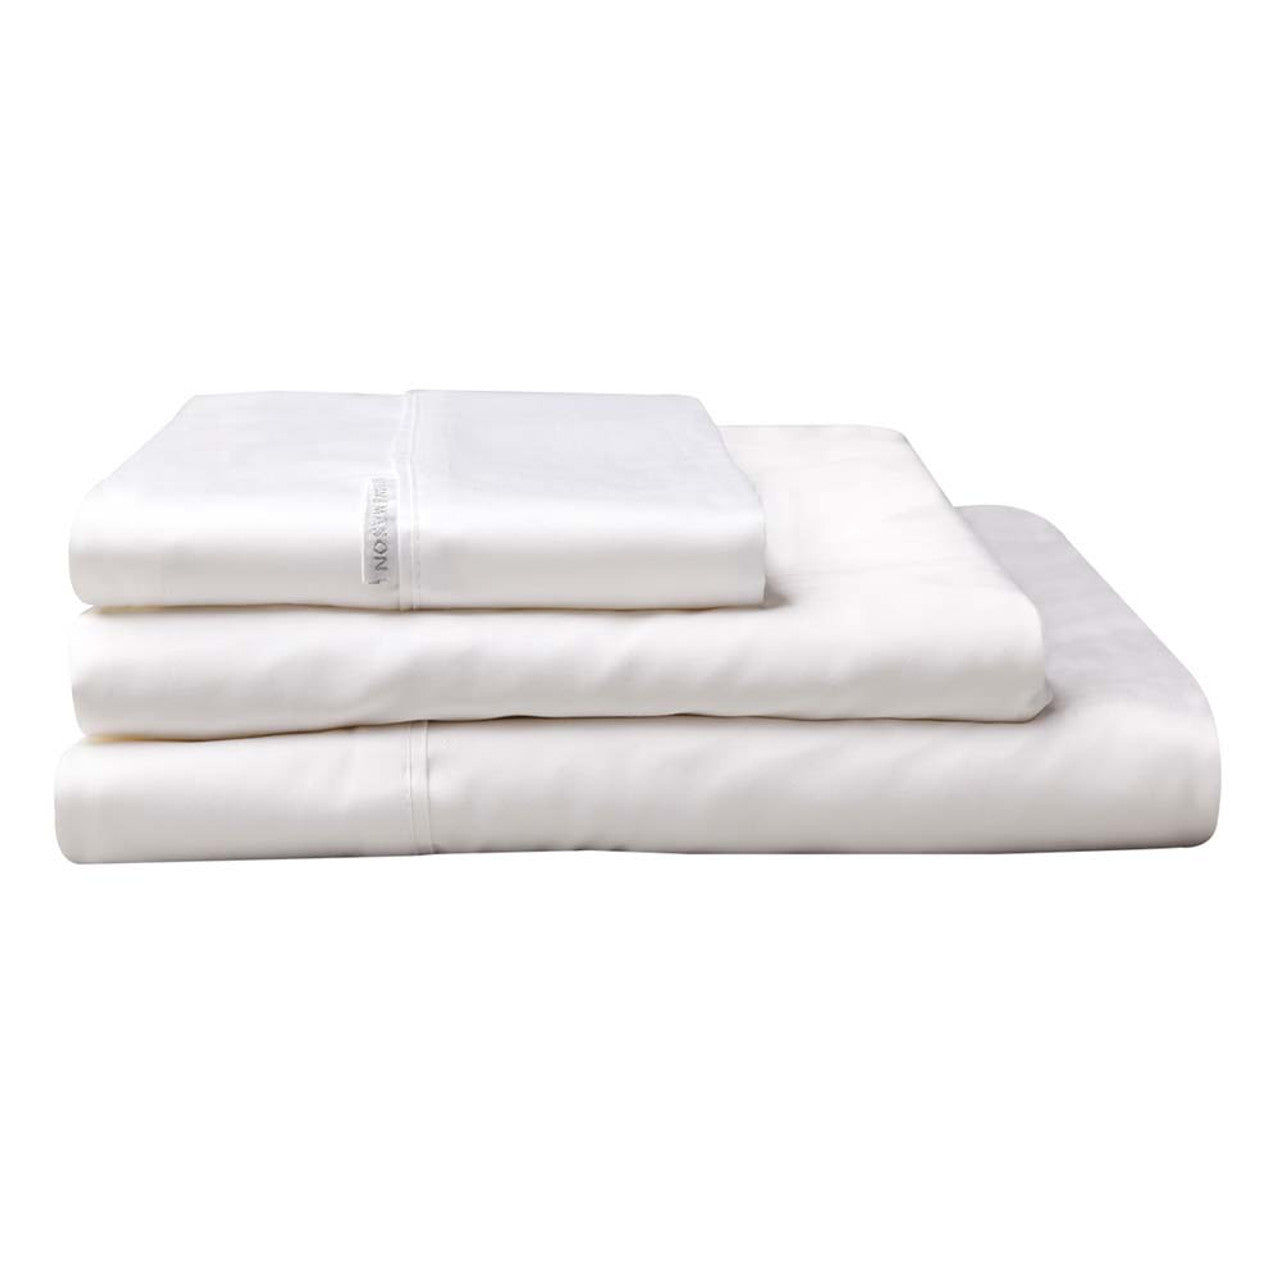 The Logan and Mason 300TC Cotton Percale White Bed Sheet Set is made from cotton, known for its natural breathability.